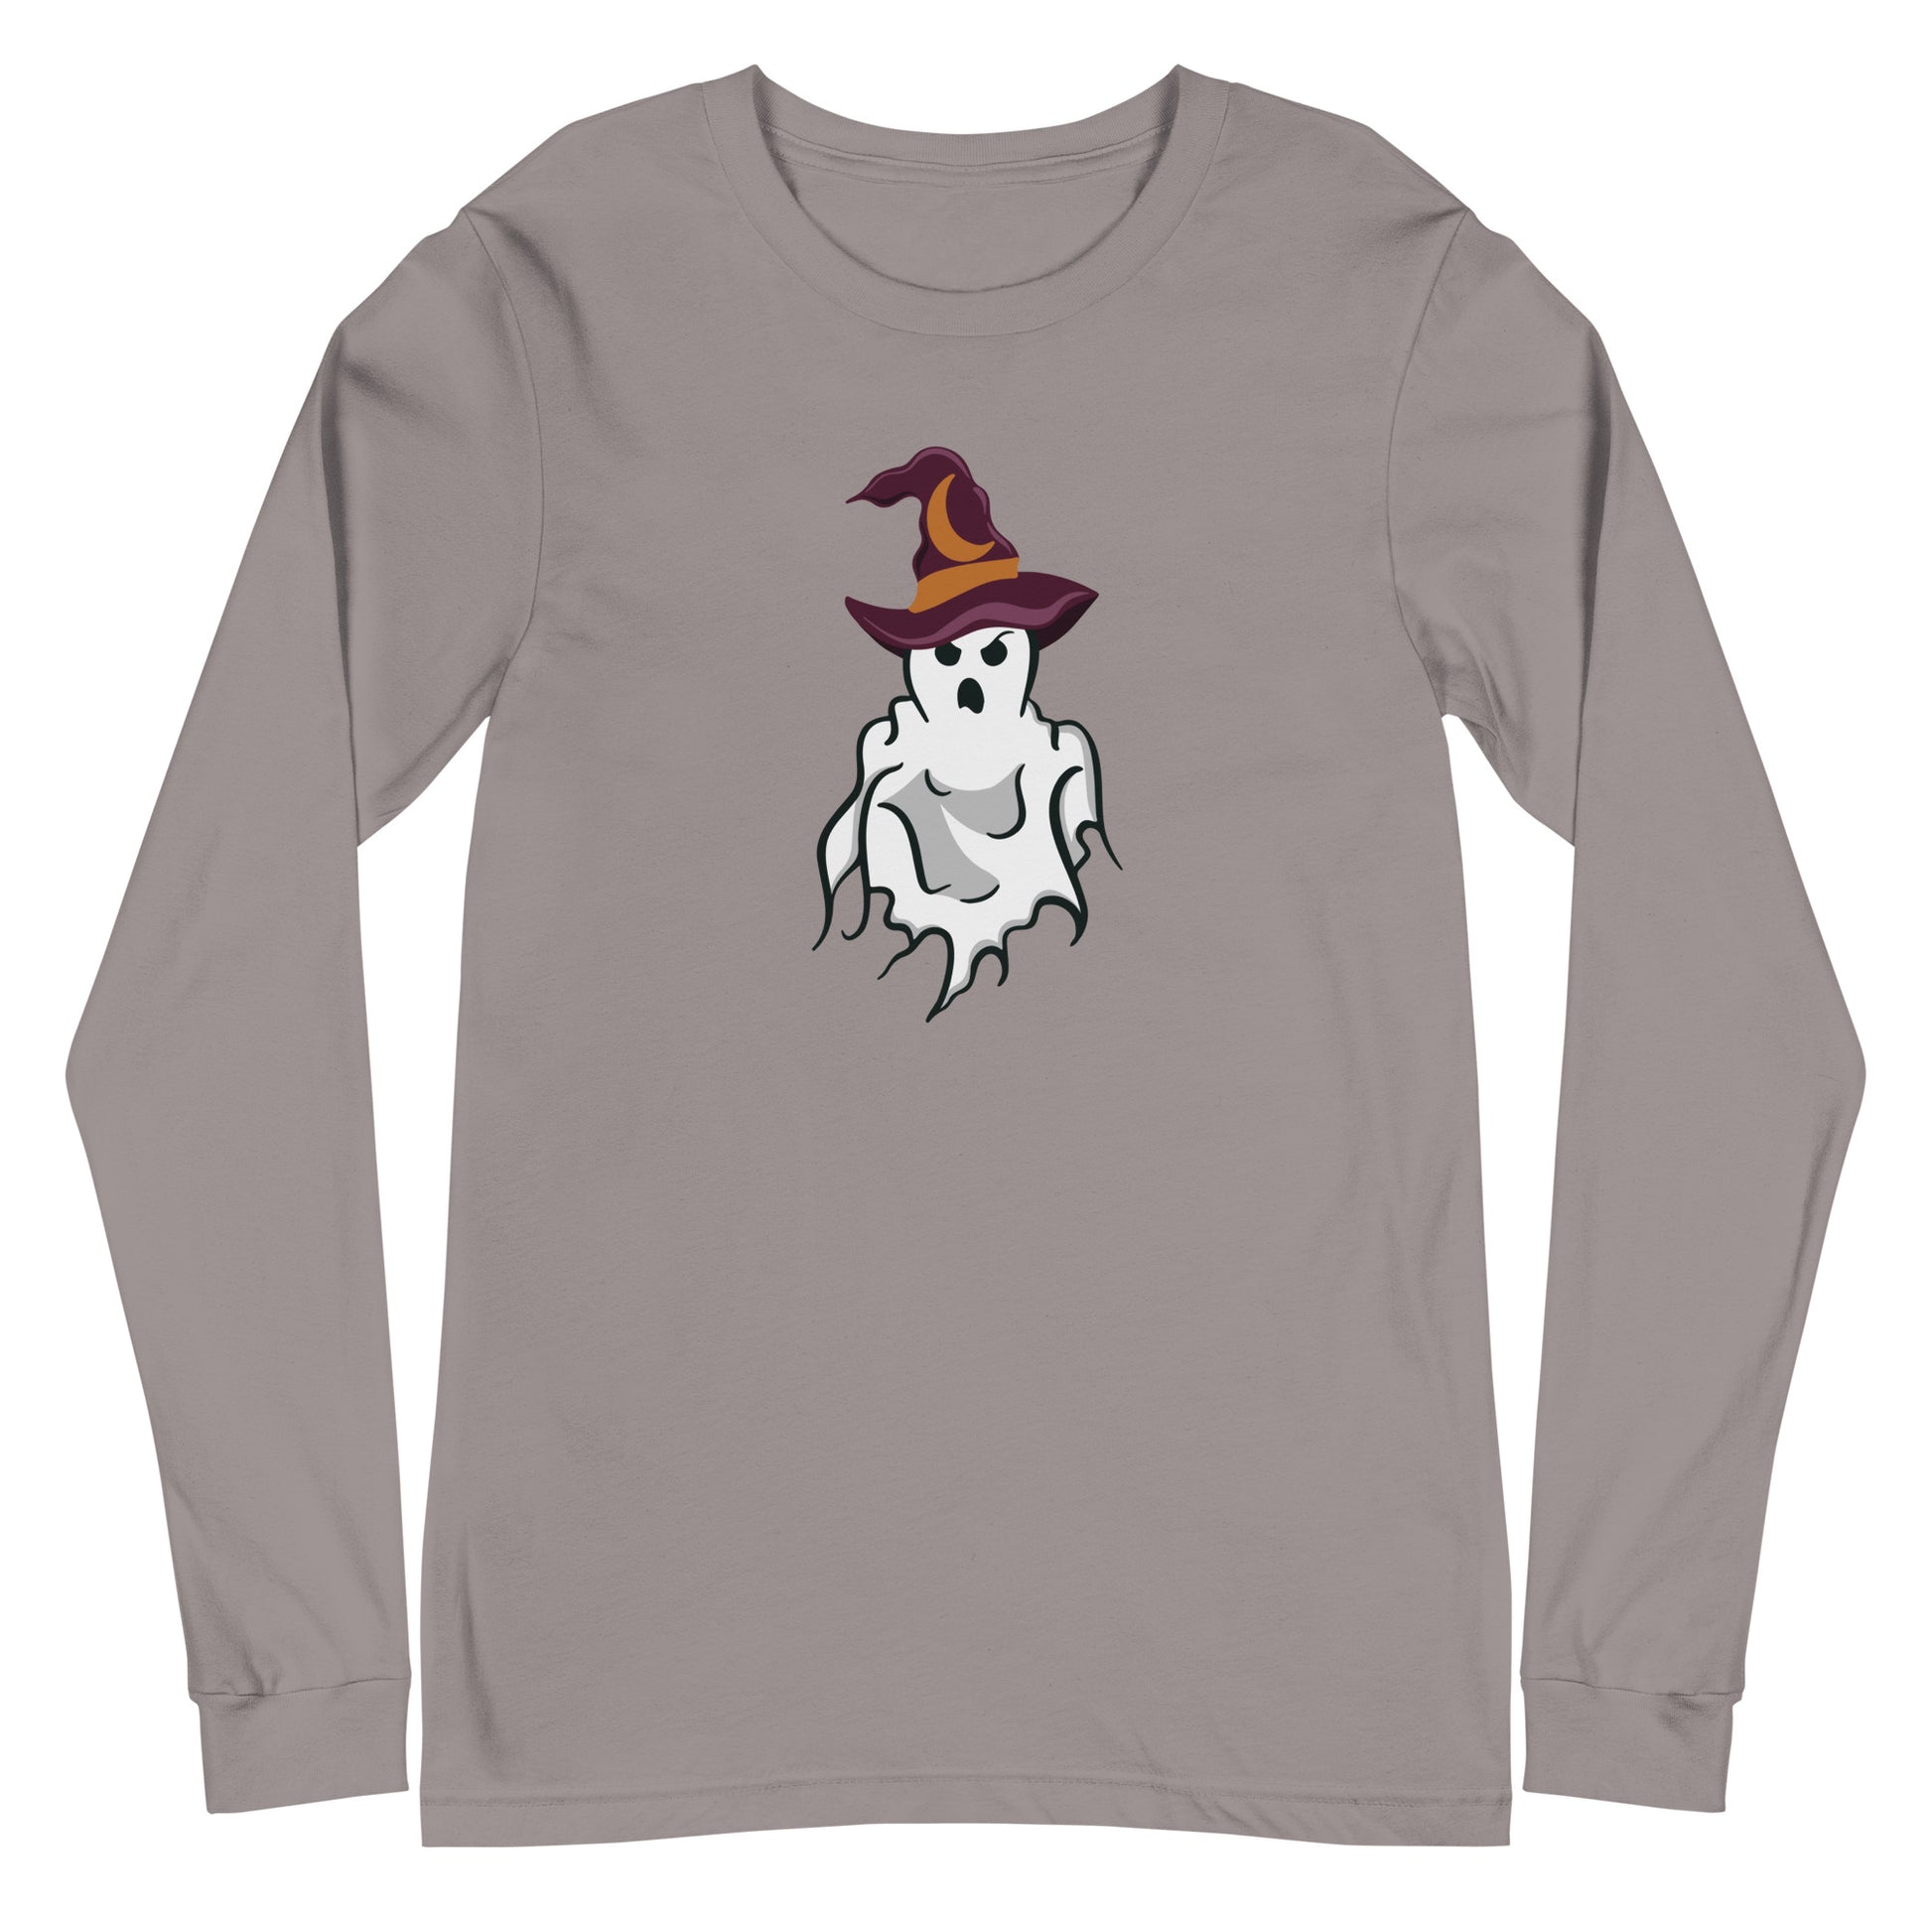 Shirt featuring a ghost wearing a witch hat